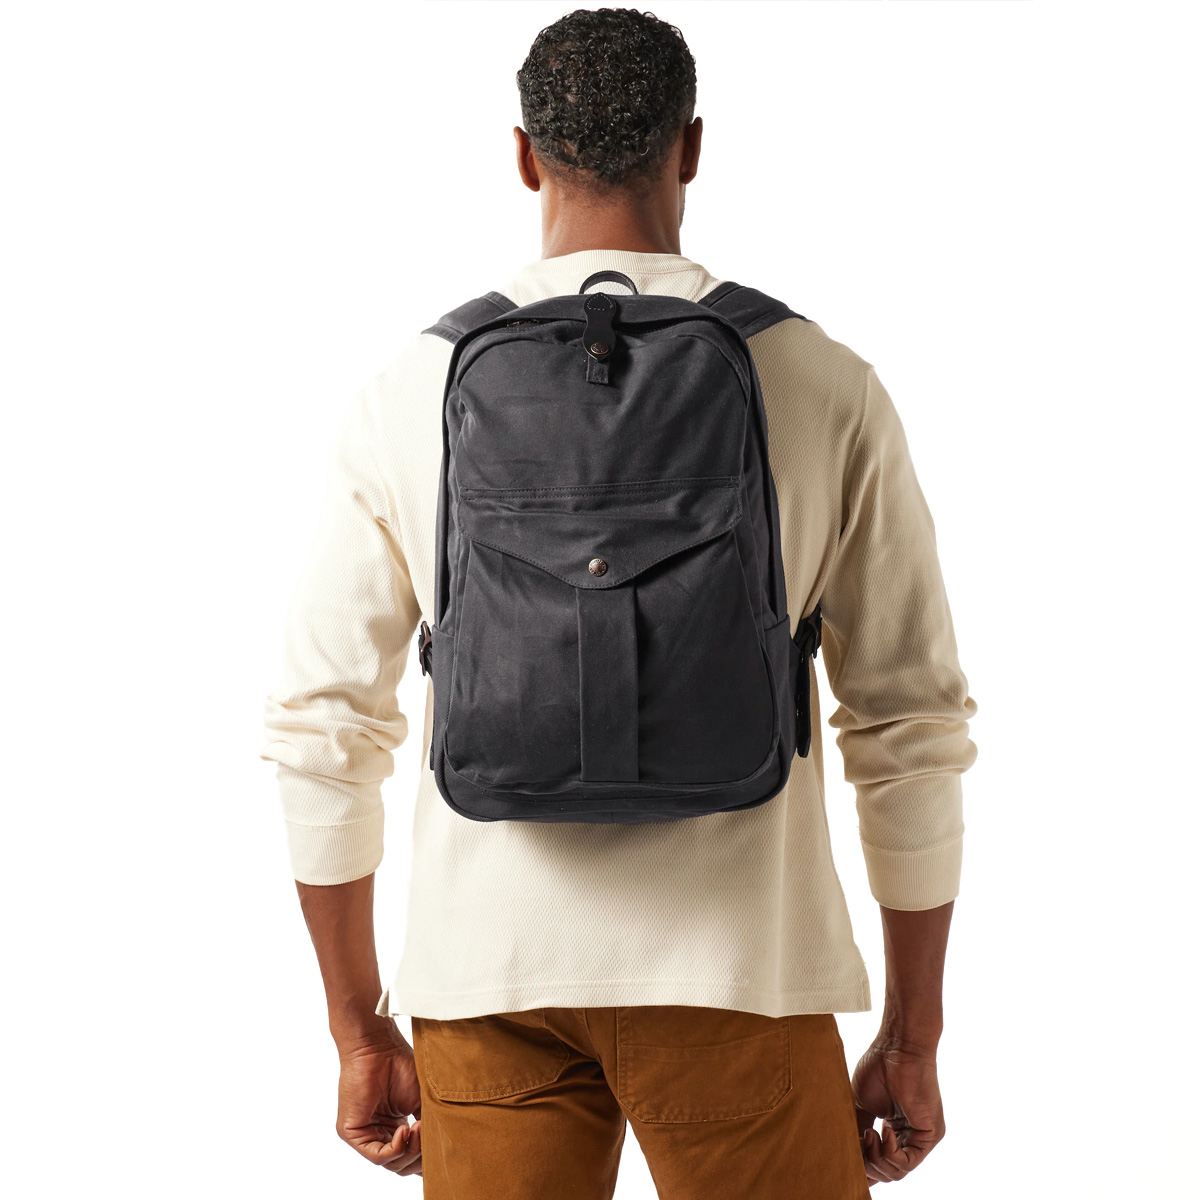 Filson Journeyman Backpack 20231638 Cinder, waterproof backpack that will last through decades of use, in any climate